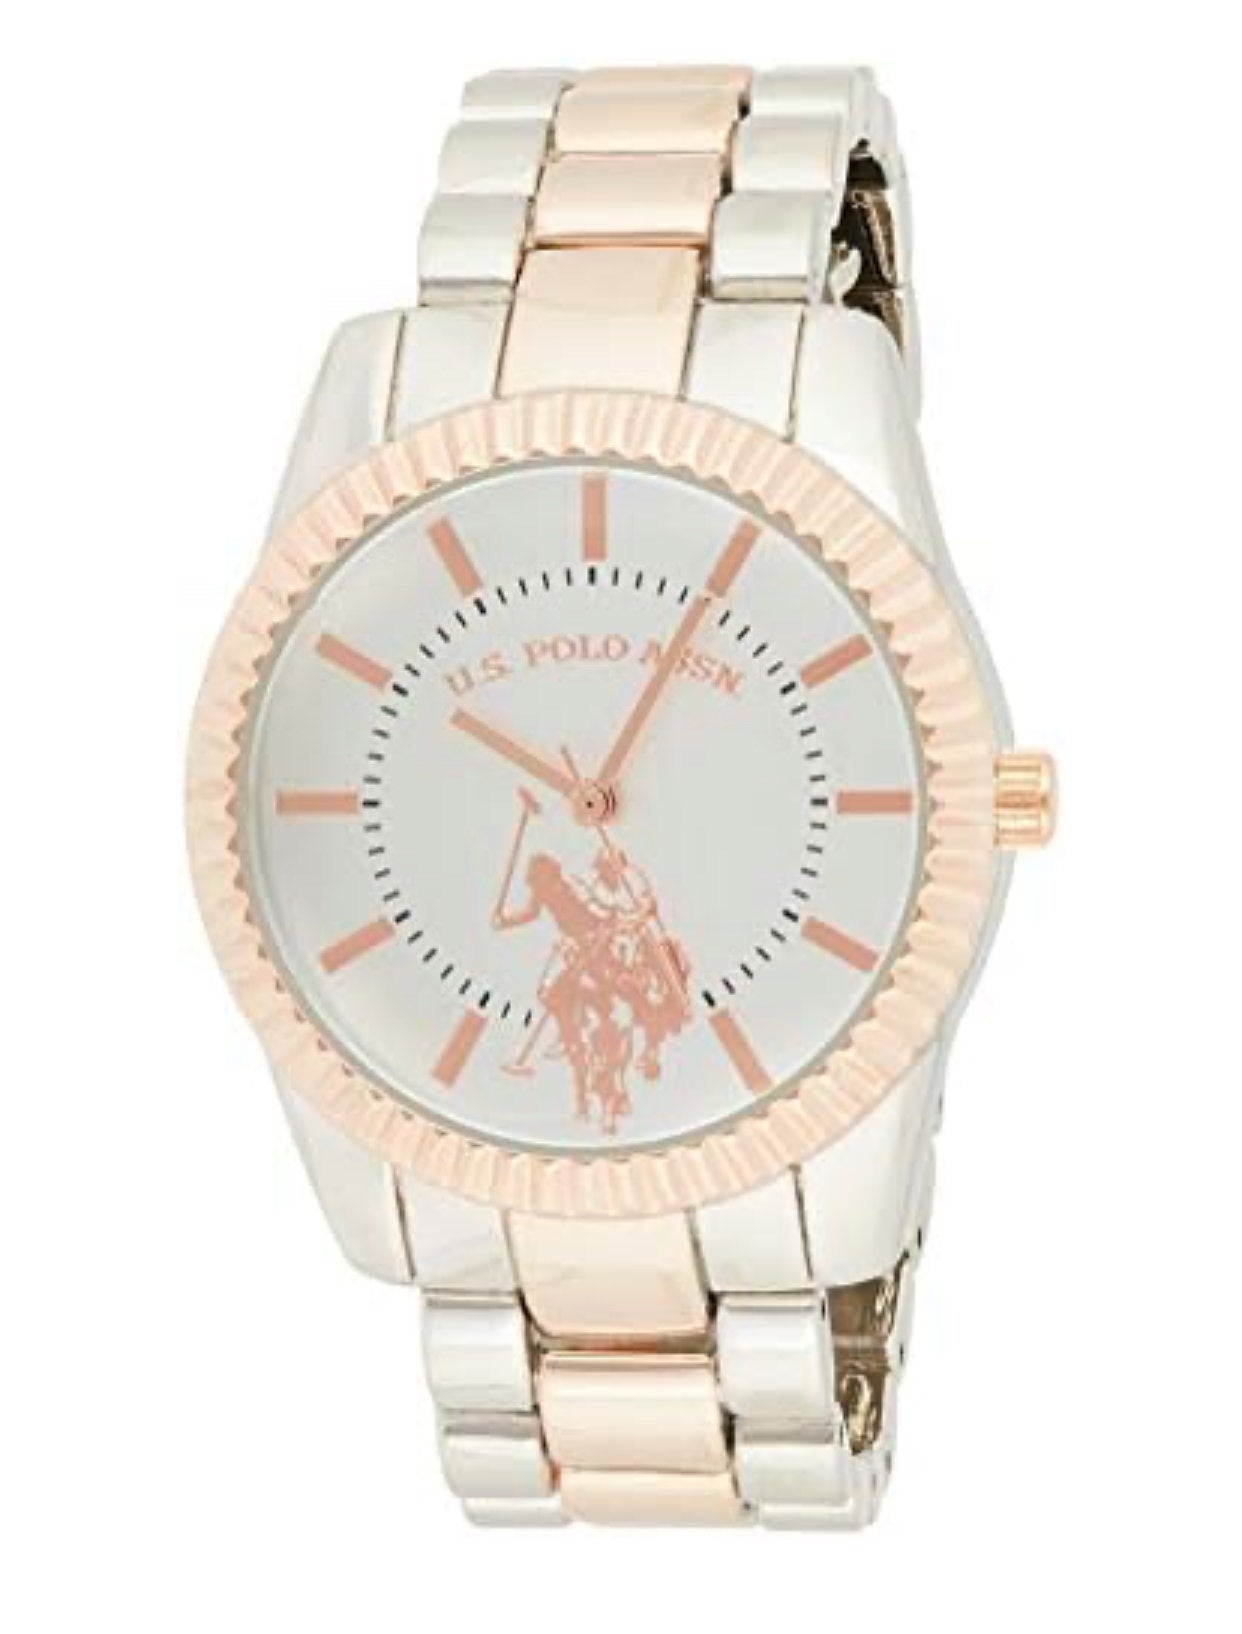 U.S. Polo Assn. Women's Quartz Watch, Analog Display and Gold Plated Strap